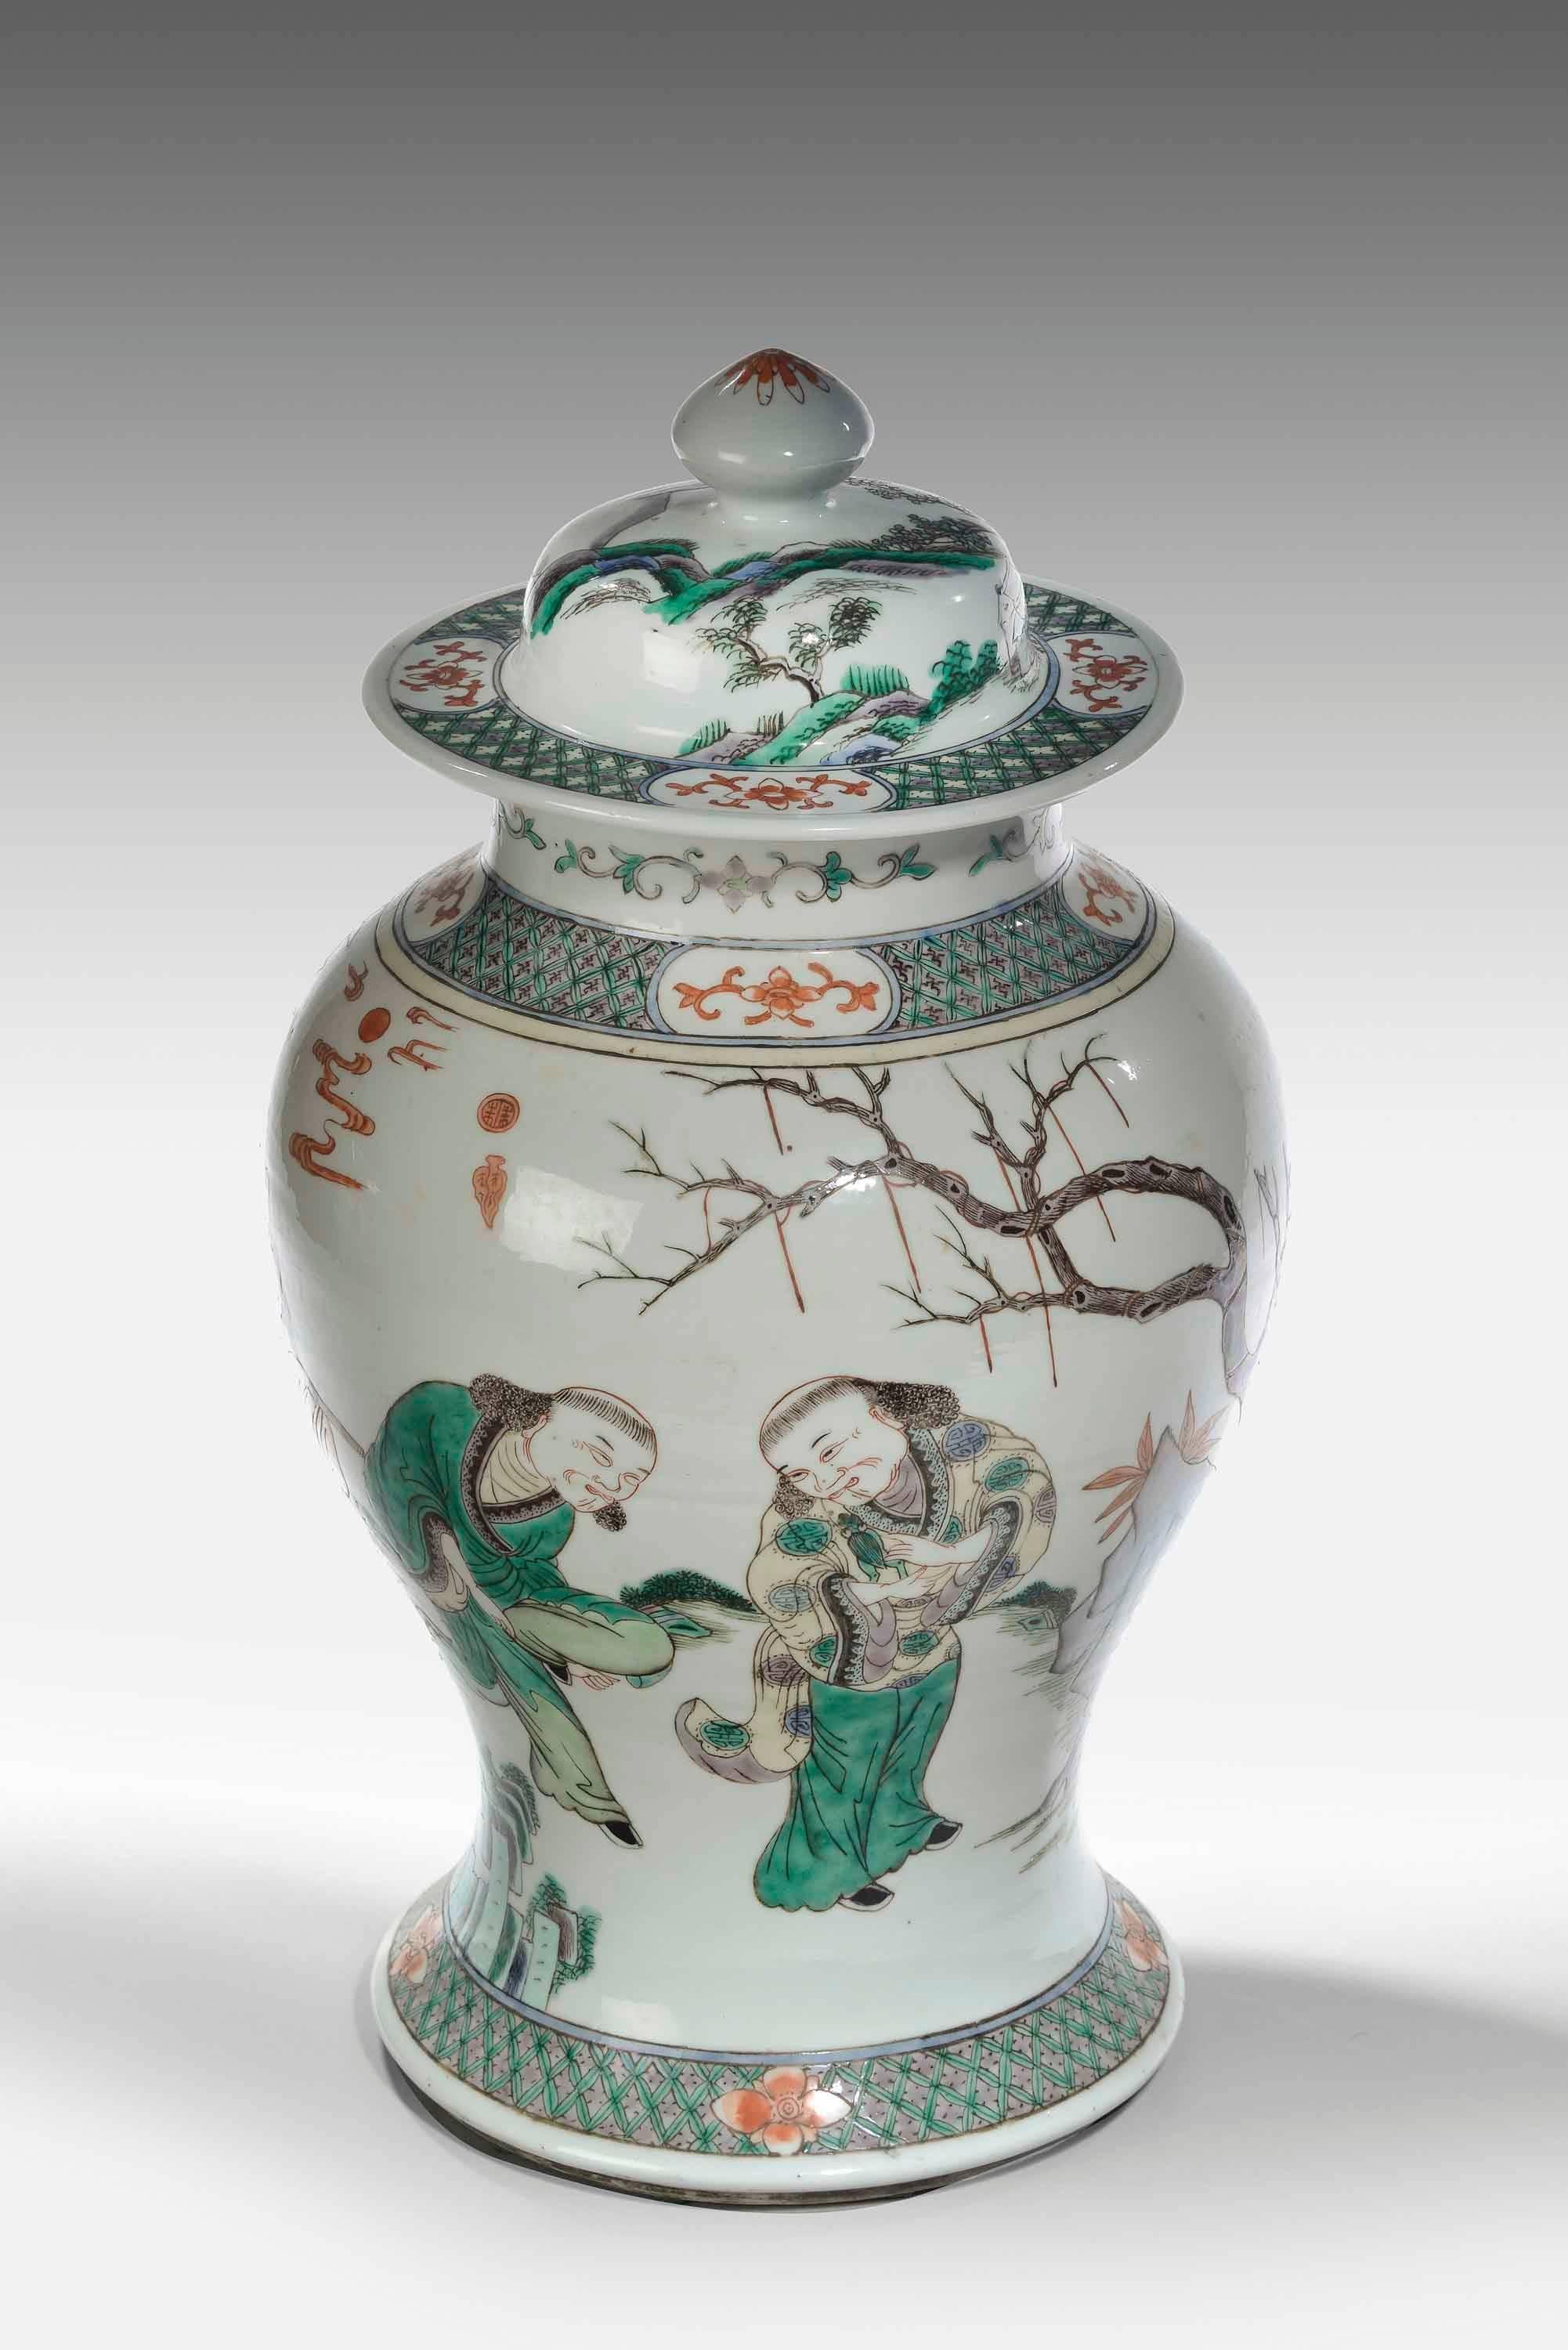 An 19th century waisted vase and lid the famille verte porcelain with exotic figures and foliage and matching borders to the top and bottom. Excellent overall condition. The domed lid carrying the same borders.